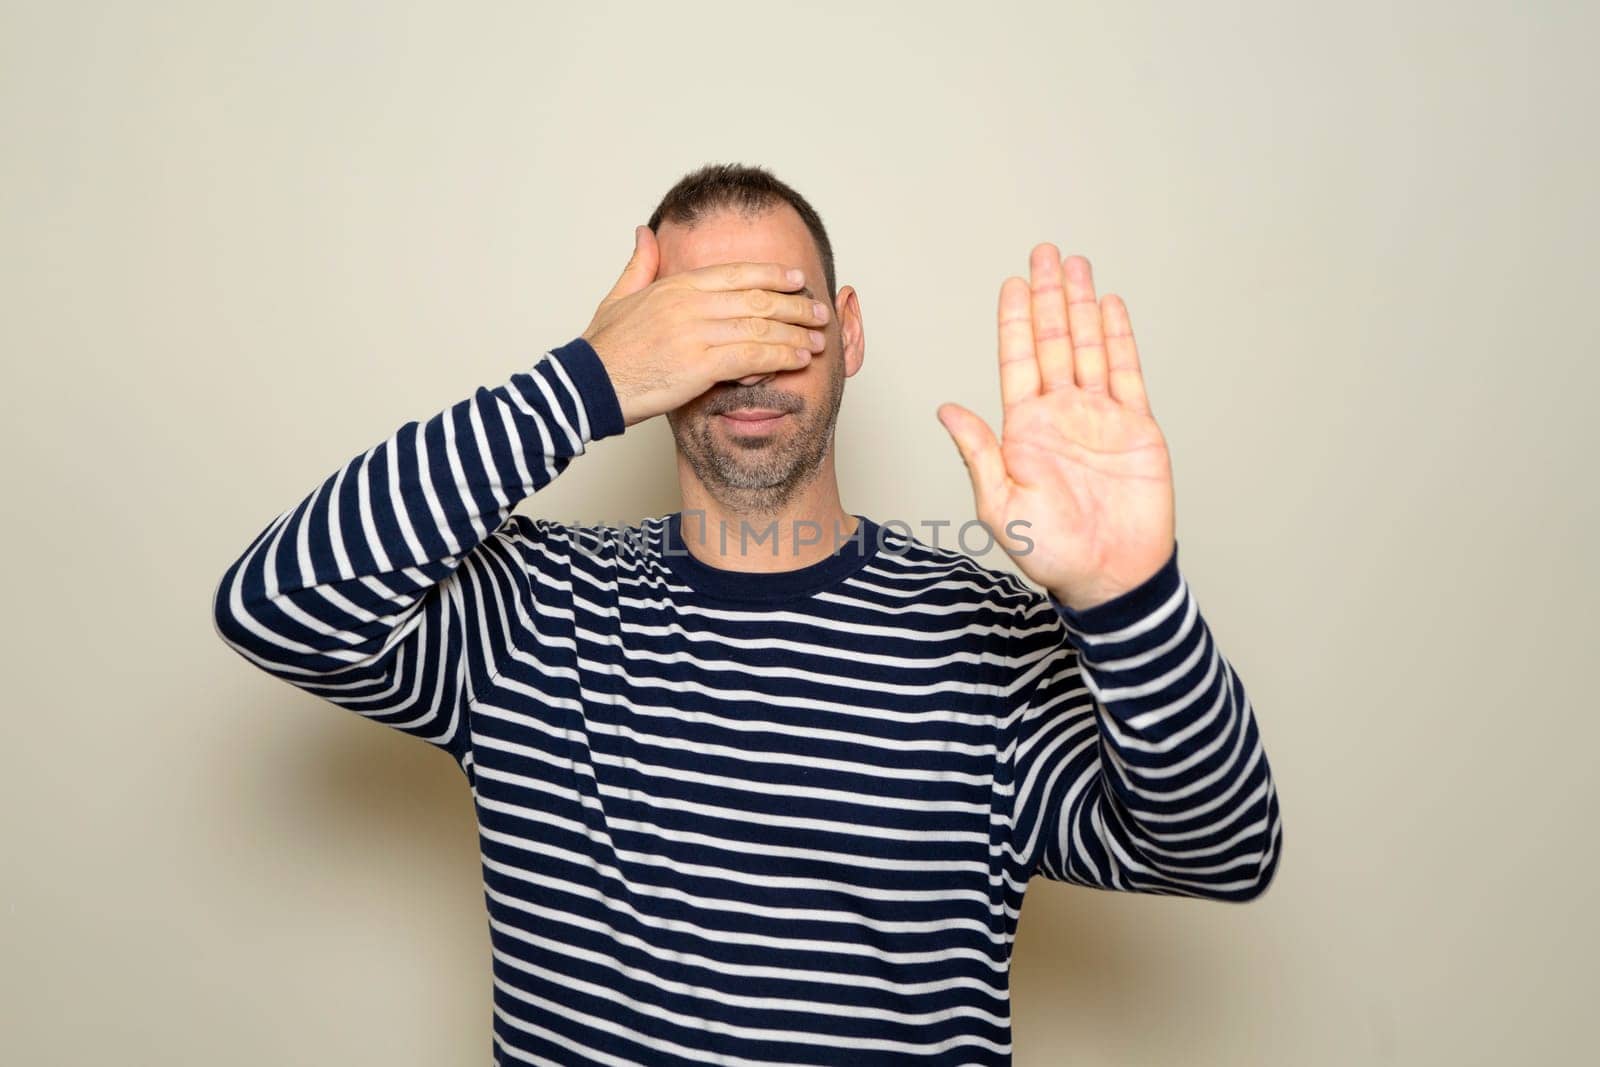 Hispanic man with beard in his 40s wearing a striped sweater covering his eyes with his hands and making stop gesture with a sad and afraid expression. Embarrassed and negative concept by Barriolo82